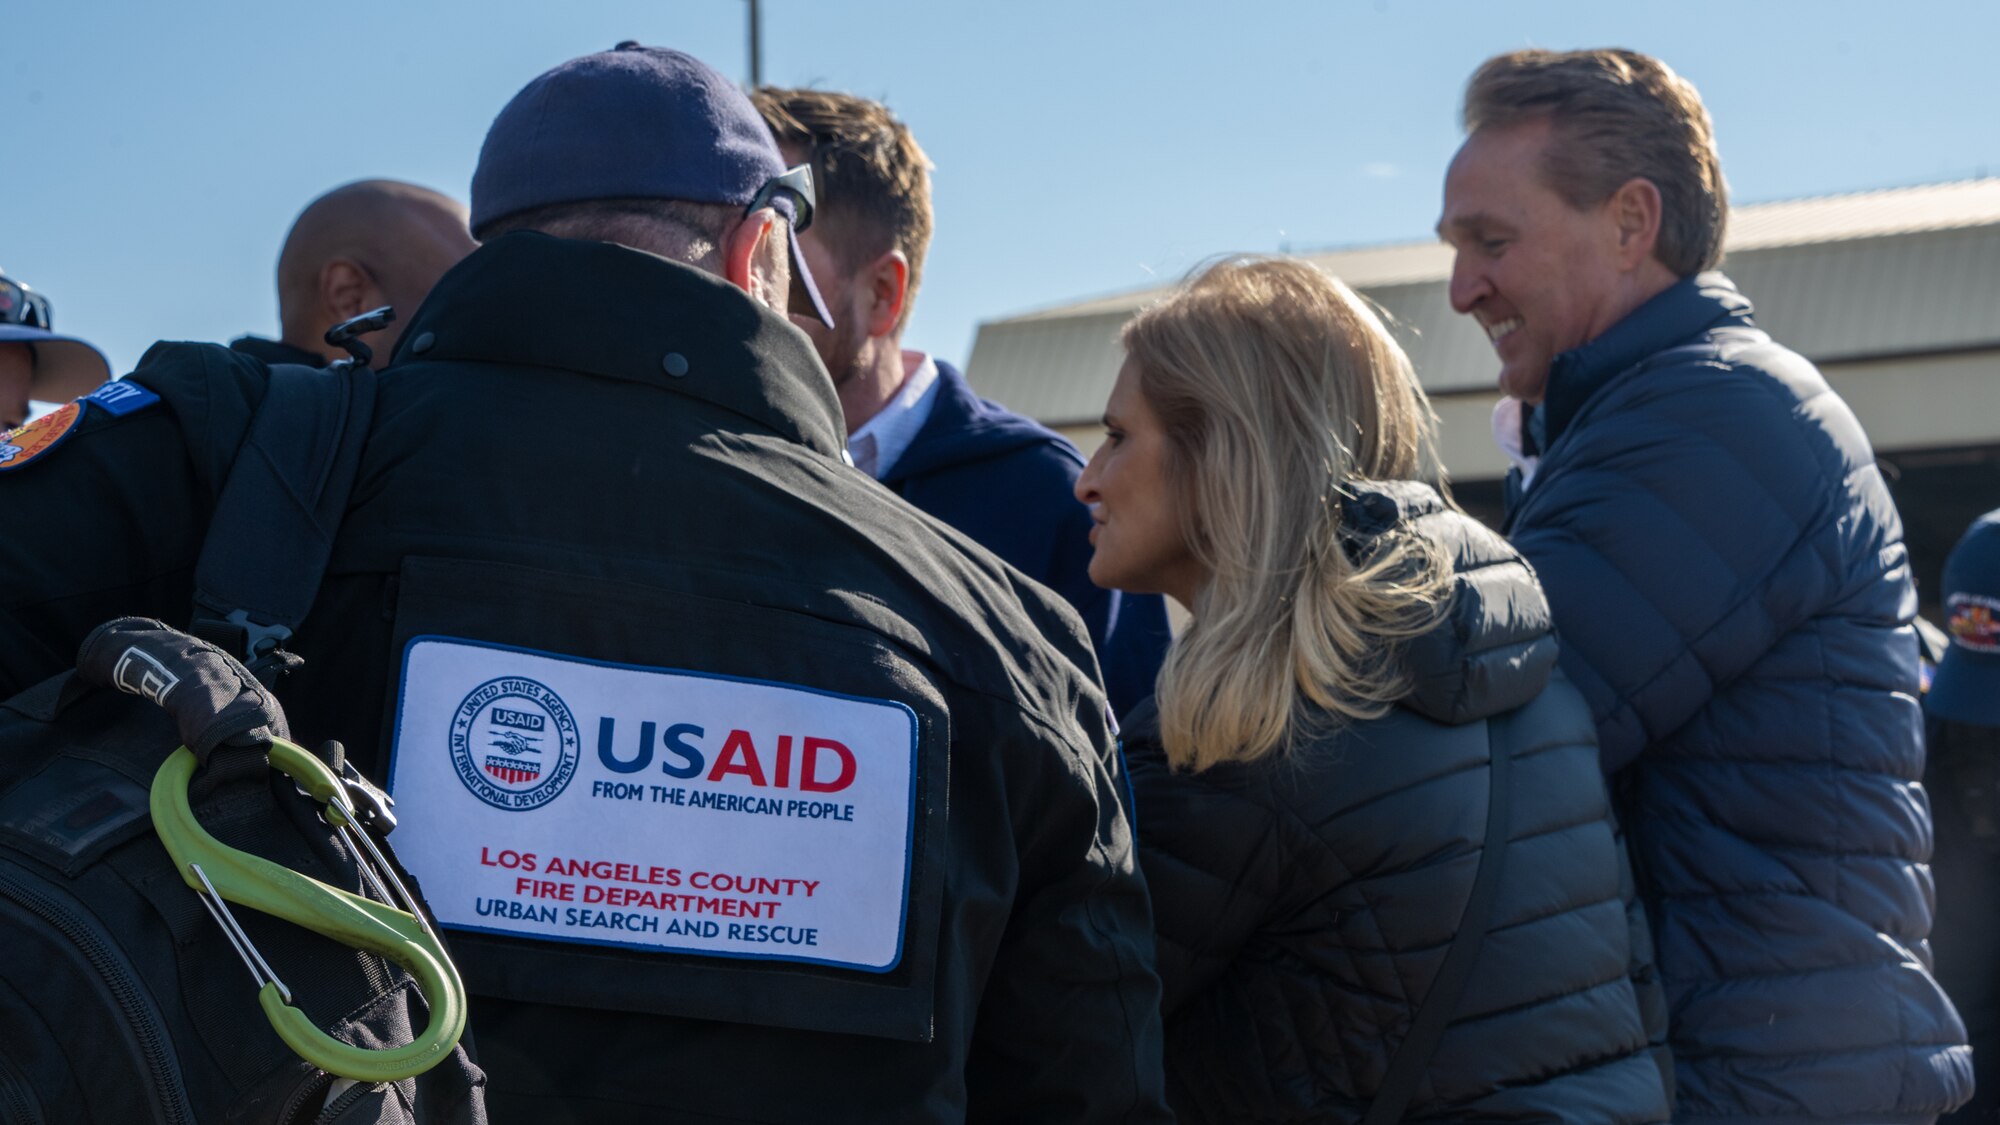 U.S. Ambassador Jeffry Flake, U.S. Ambassador to Türkiye, right, speaks with members of the United States Agency for International Development’s Disaster Assistance Response Team, left, during their arrival at Incirlik Air Base, Türkiye, Feb 8, 2023. Ambassador Flake visited Incirlik AB to greet members of the USAID team, following a series of earthquakes that struck central-southern Türkiye on Feb 6, 2023. As Ambassador to Türkiye, Flake holds the highest civilian position as The Chief of Mission, and impacts the communication and resources of U.S. personnel, advancing the U.S. foreign policy goals. As a fellow NATO ally, the U.S. Government mobilized personnel to assist in Türkiye in their response efforts. (U.S. Air Force photo by Senior Airman David D. McLoney)